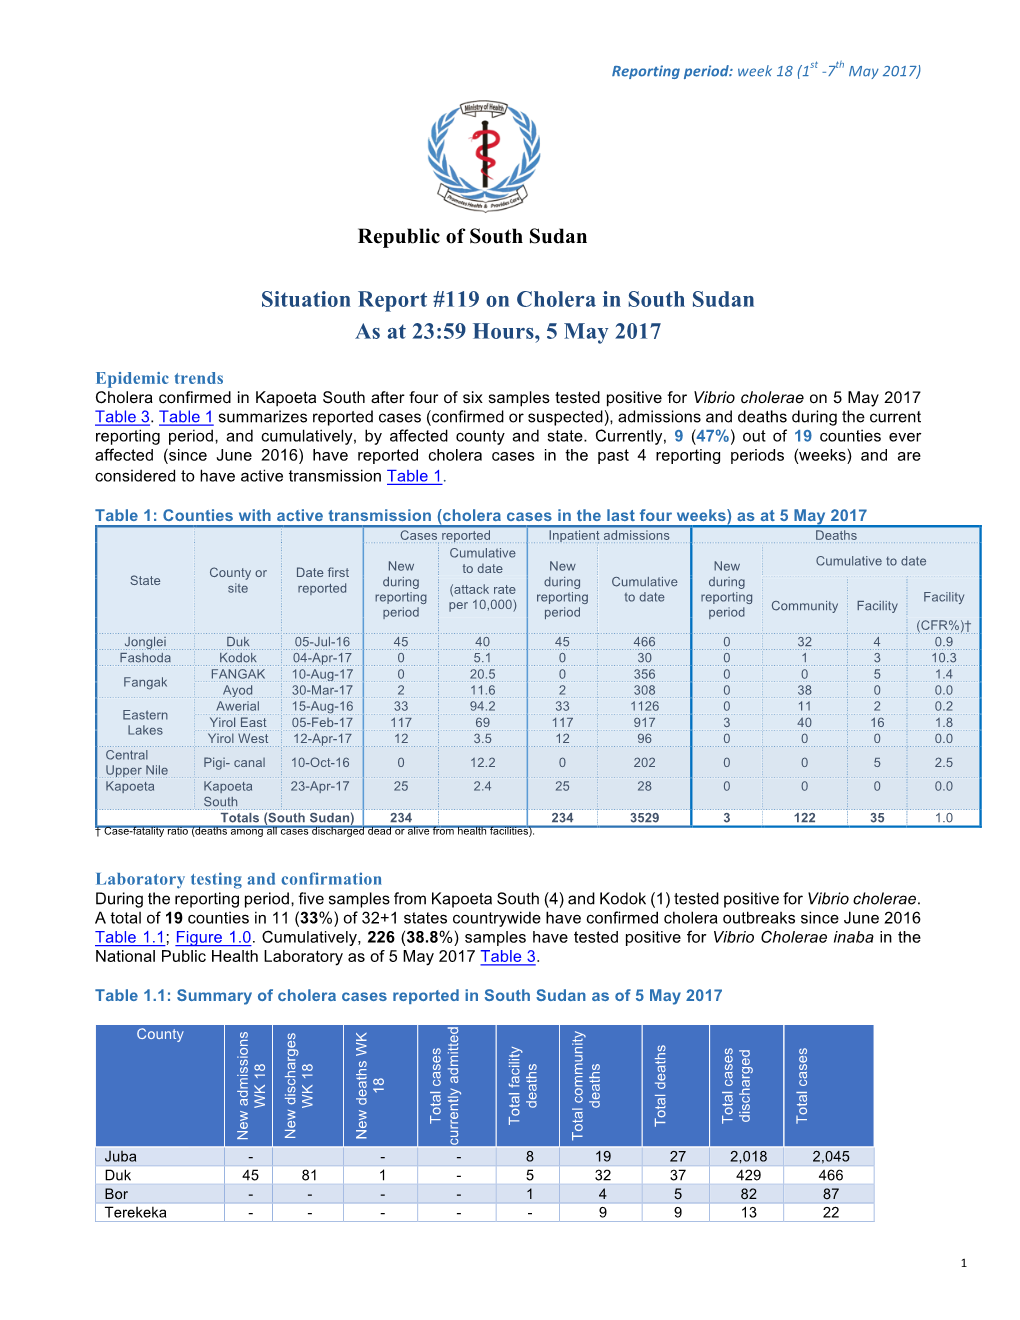 Situation Report #119 on Cholera in South Sudan As at 23:59 Hours, 5 May 2017